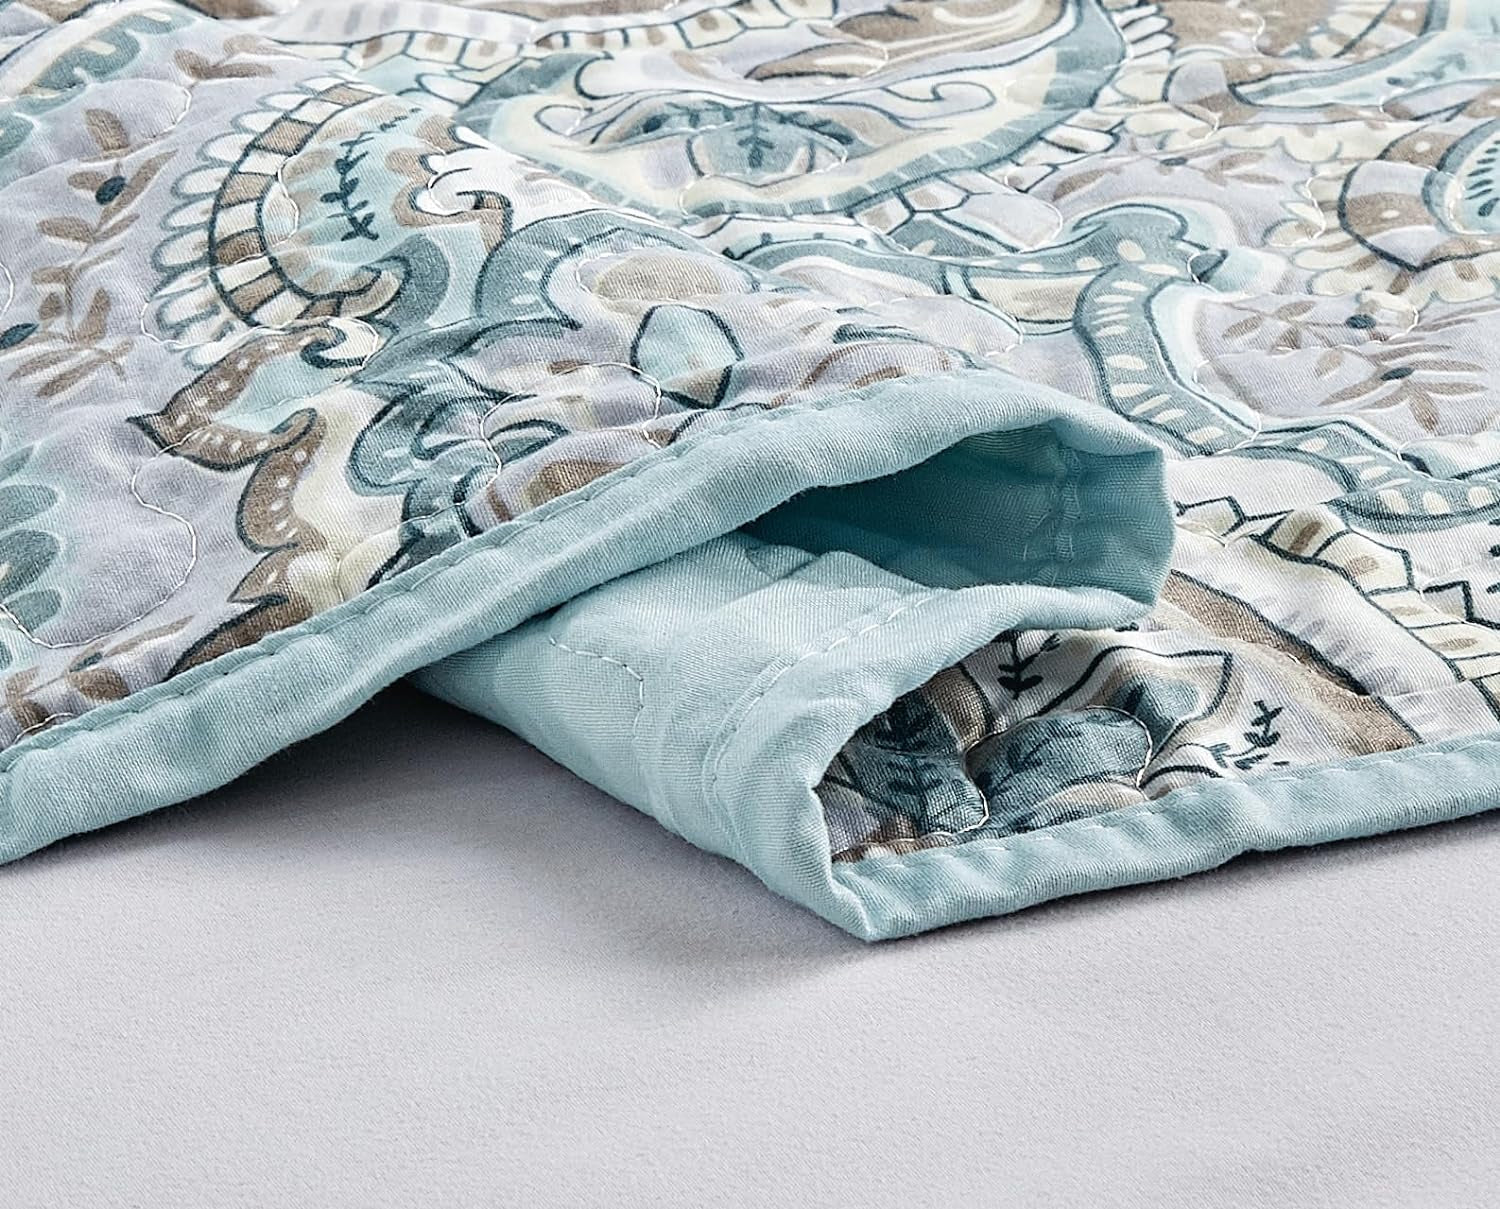 3-Piece Fine Printed Oversize (100" X 95") Quilt Set Reversible Bedspread Coverlet QUEEN SIZE Bed Cover (Pale Blue, Grey, Paisley)